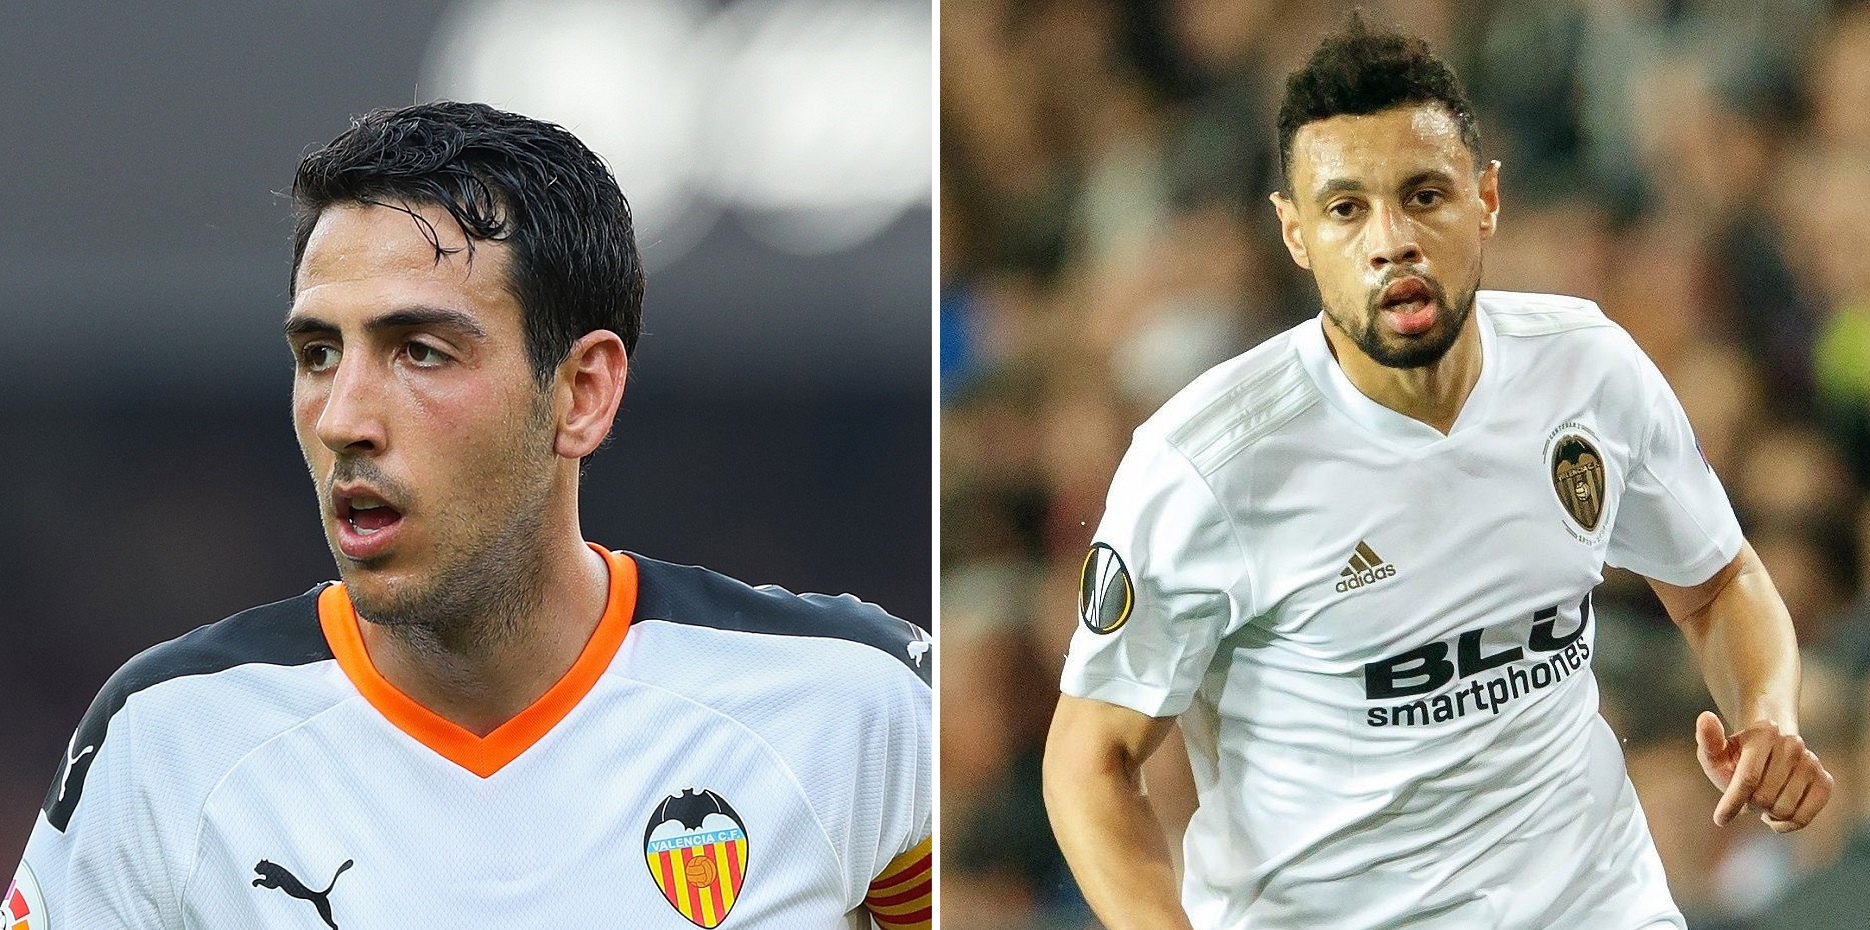 Valencia under huge financial crisis, on the verge of being out of competitions - THE SPORTS ROOM